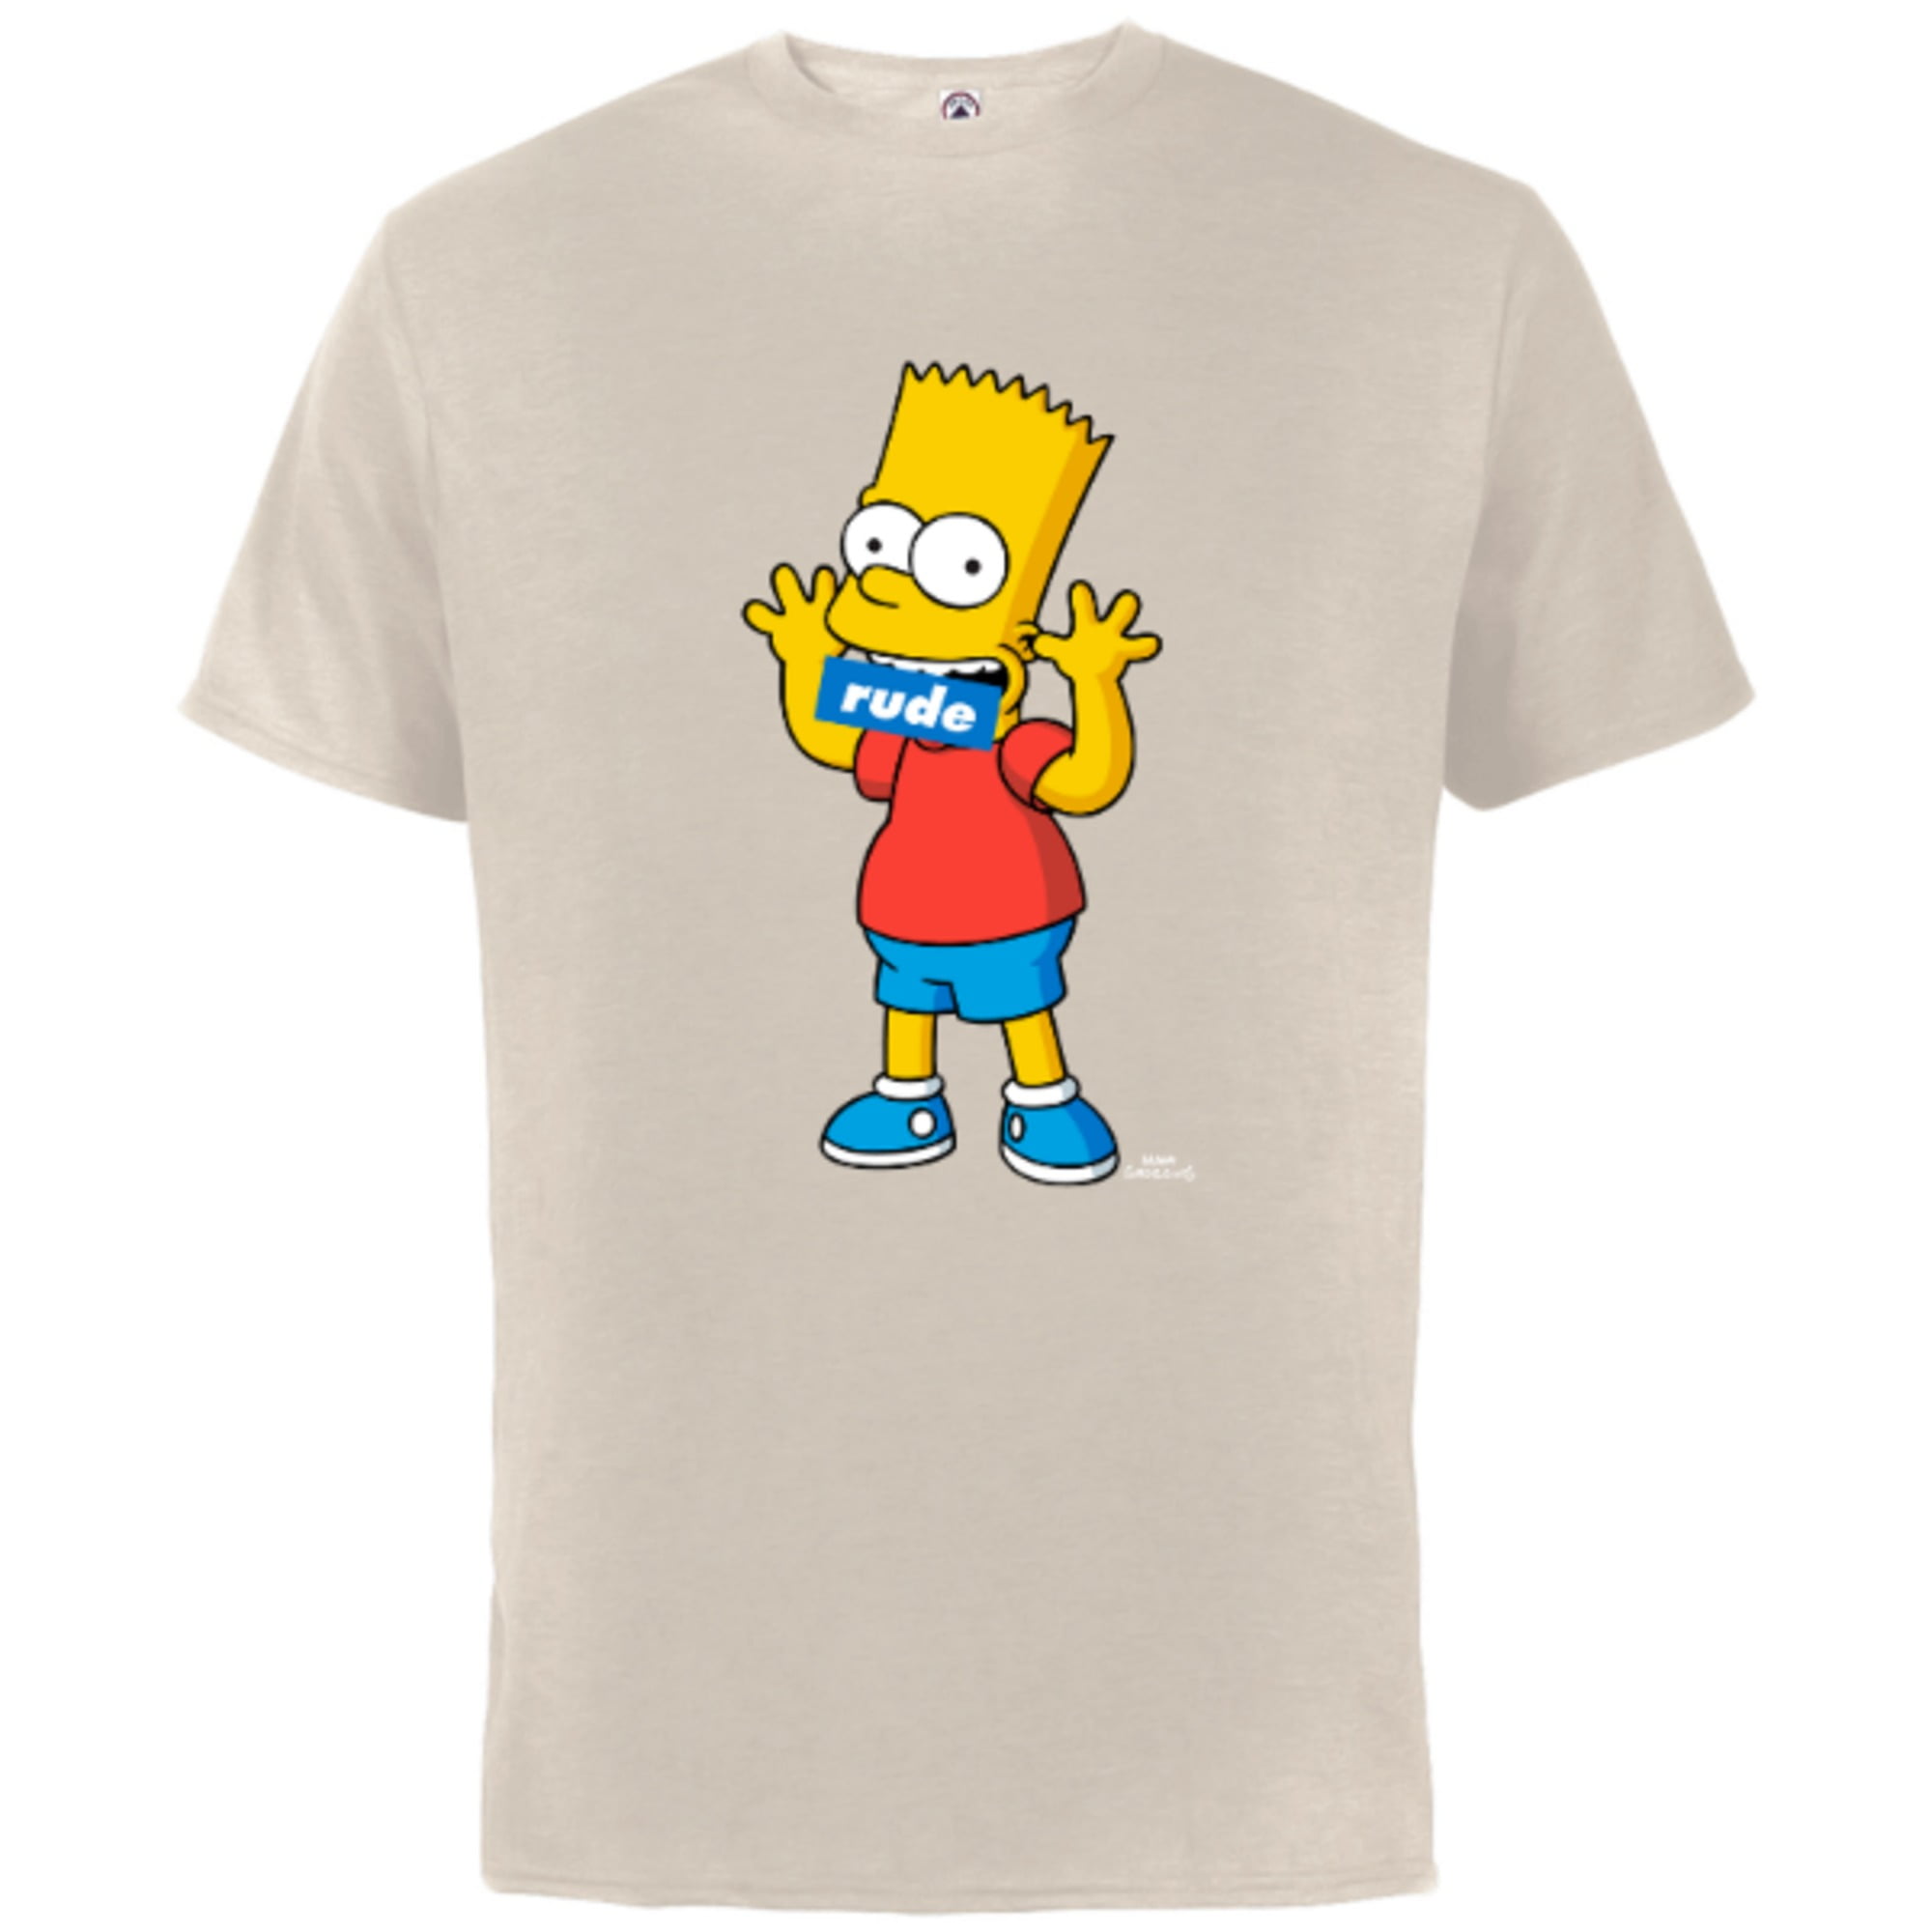 The Simpsons Bart Simpson Rude Mouth - Short Sleeve Cotton T-Shirt for ...